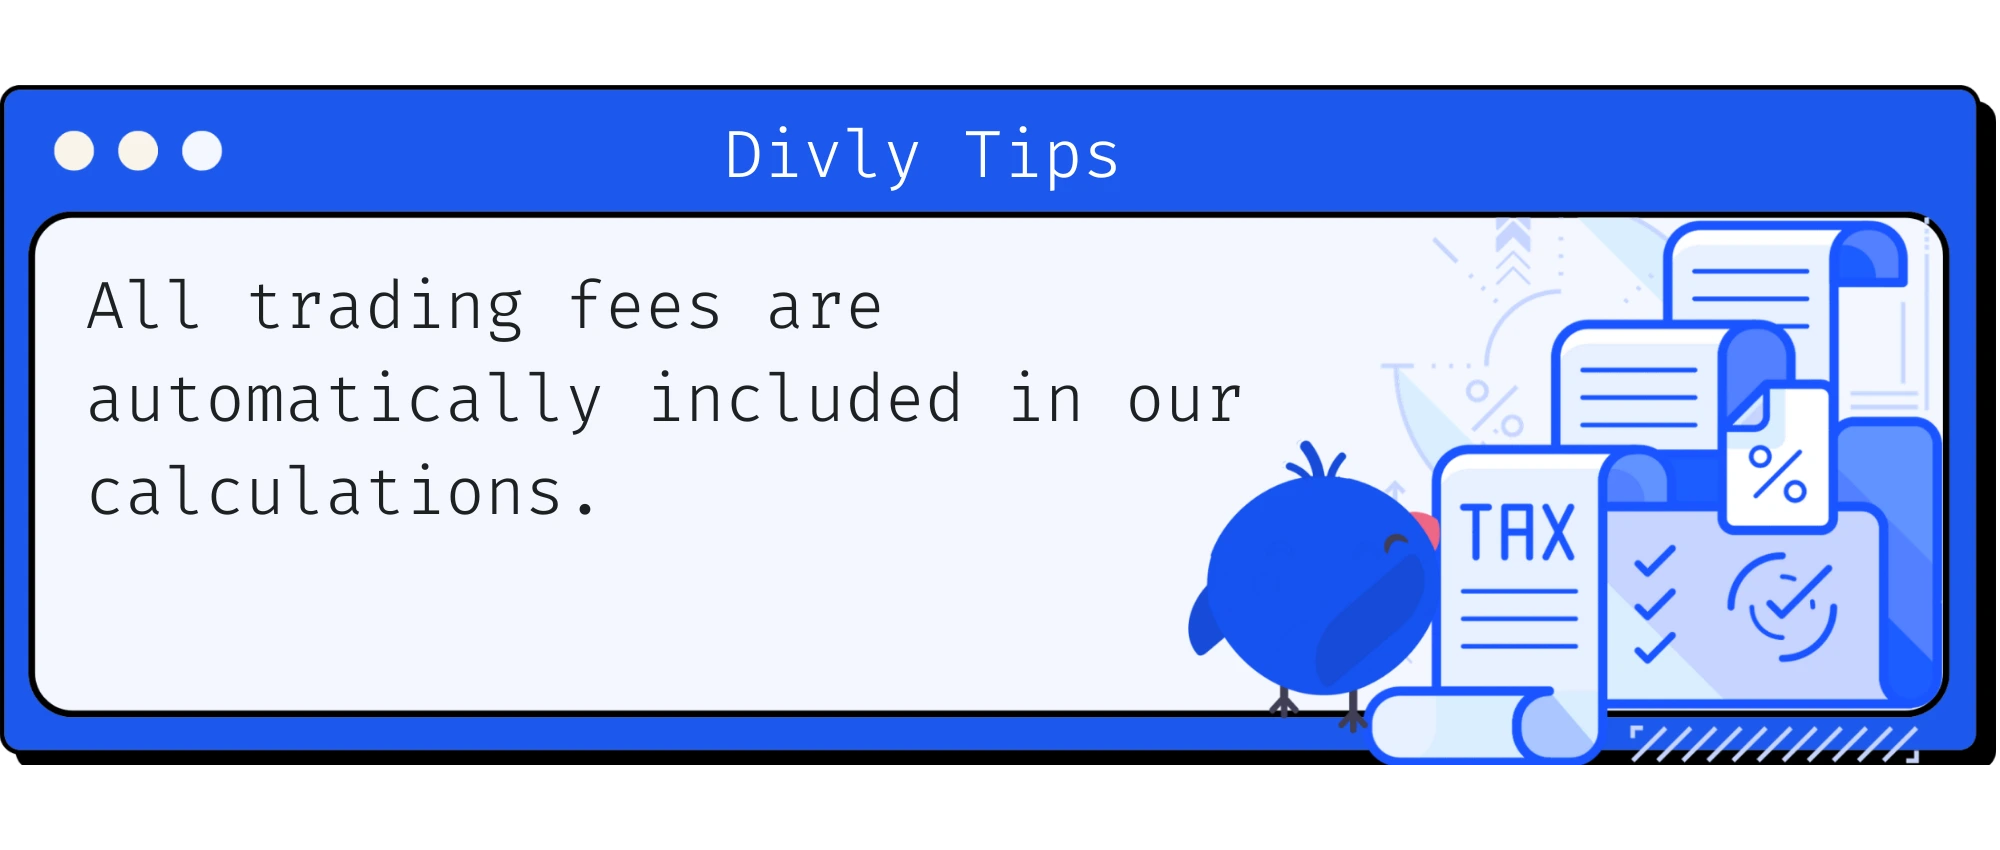 Divly automatically takes trading fees into account in its calculations.